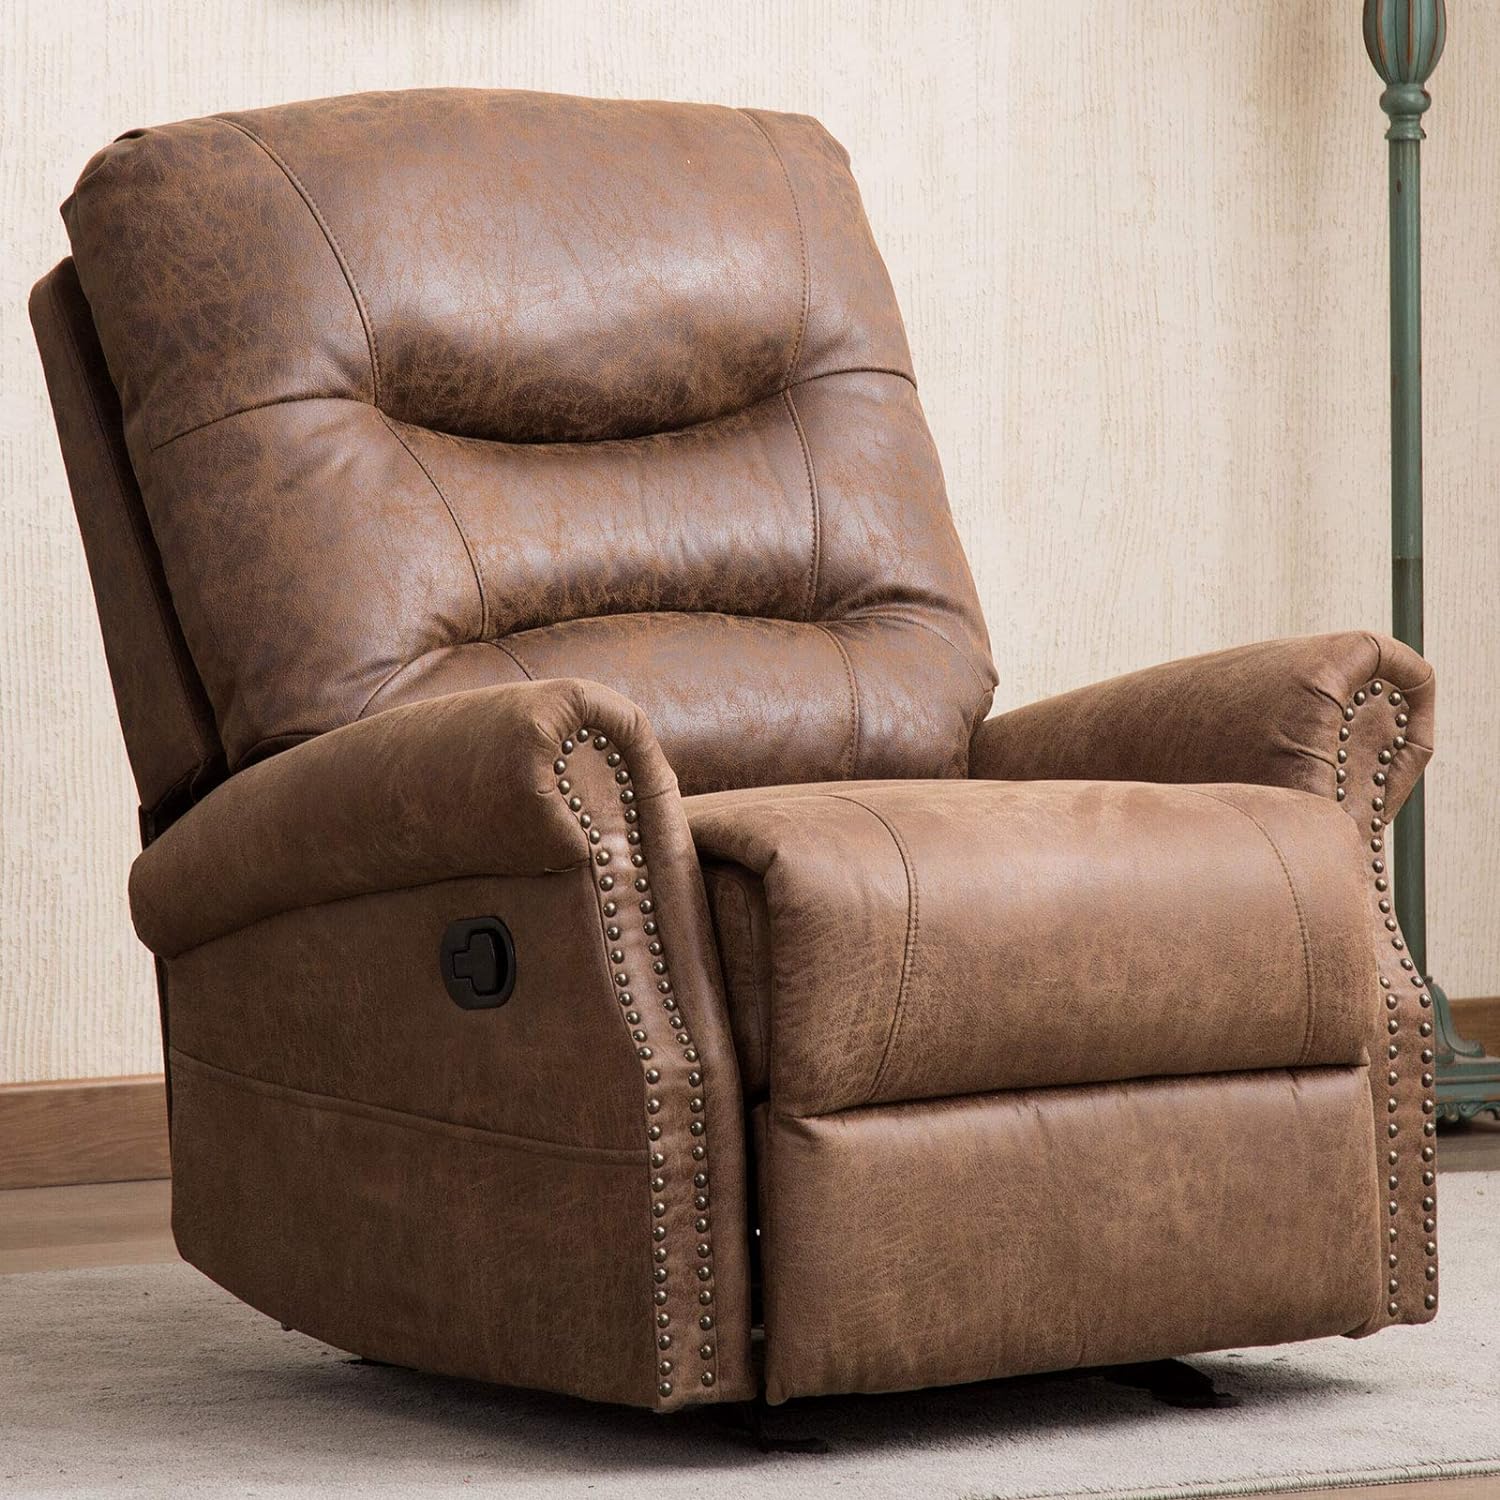 Who Makes The Best Rocker Recliner Chairs